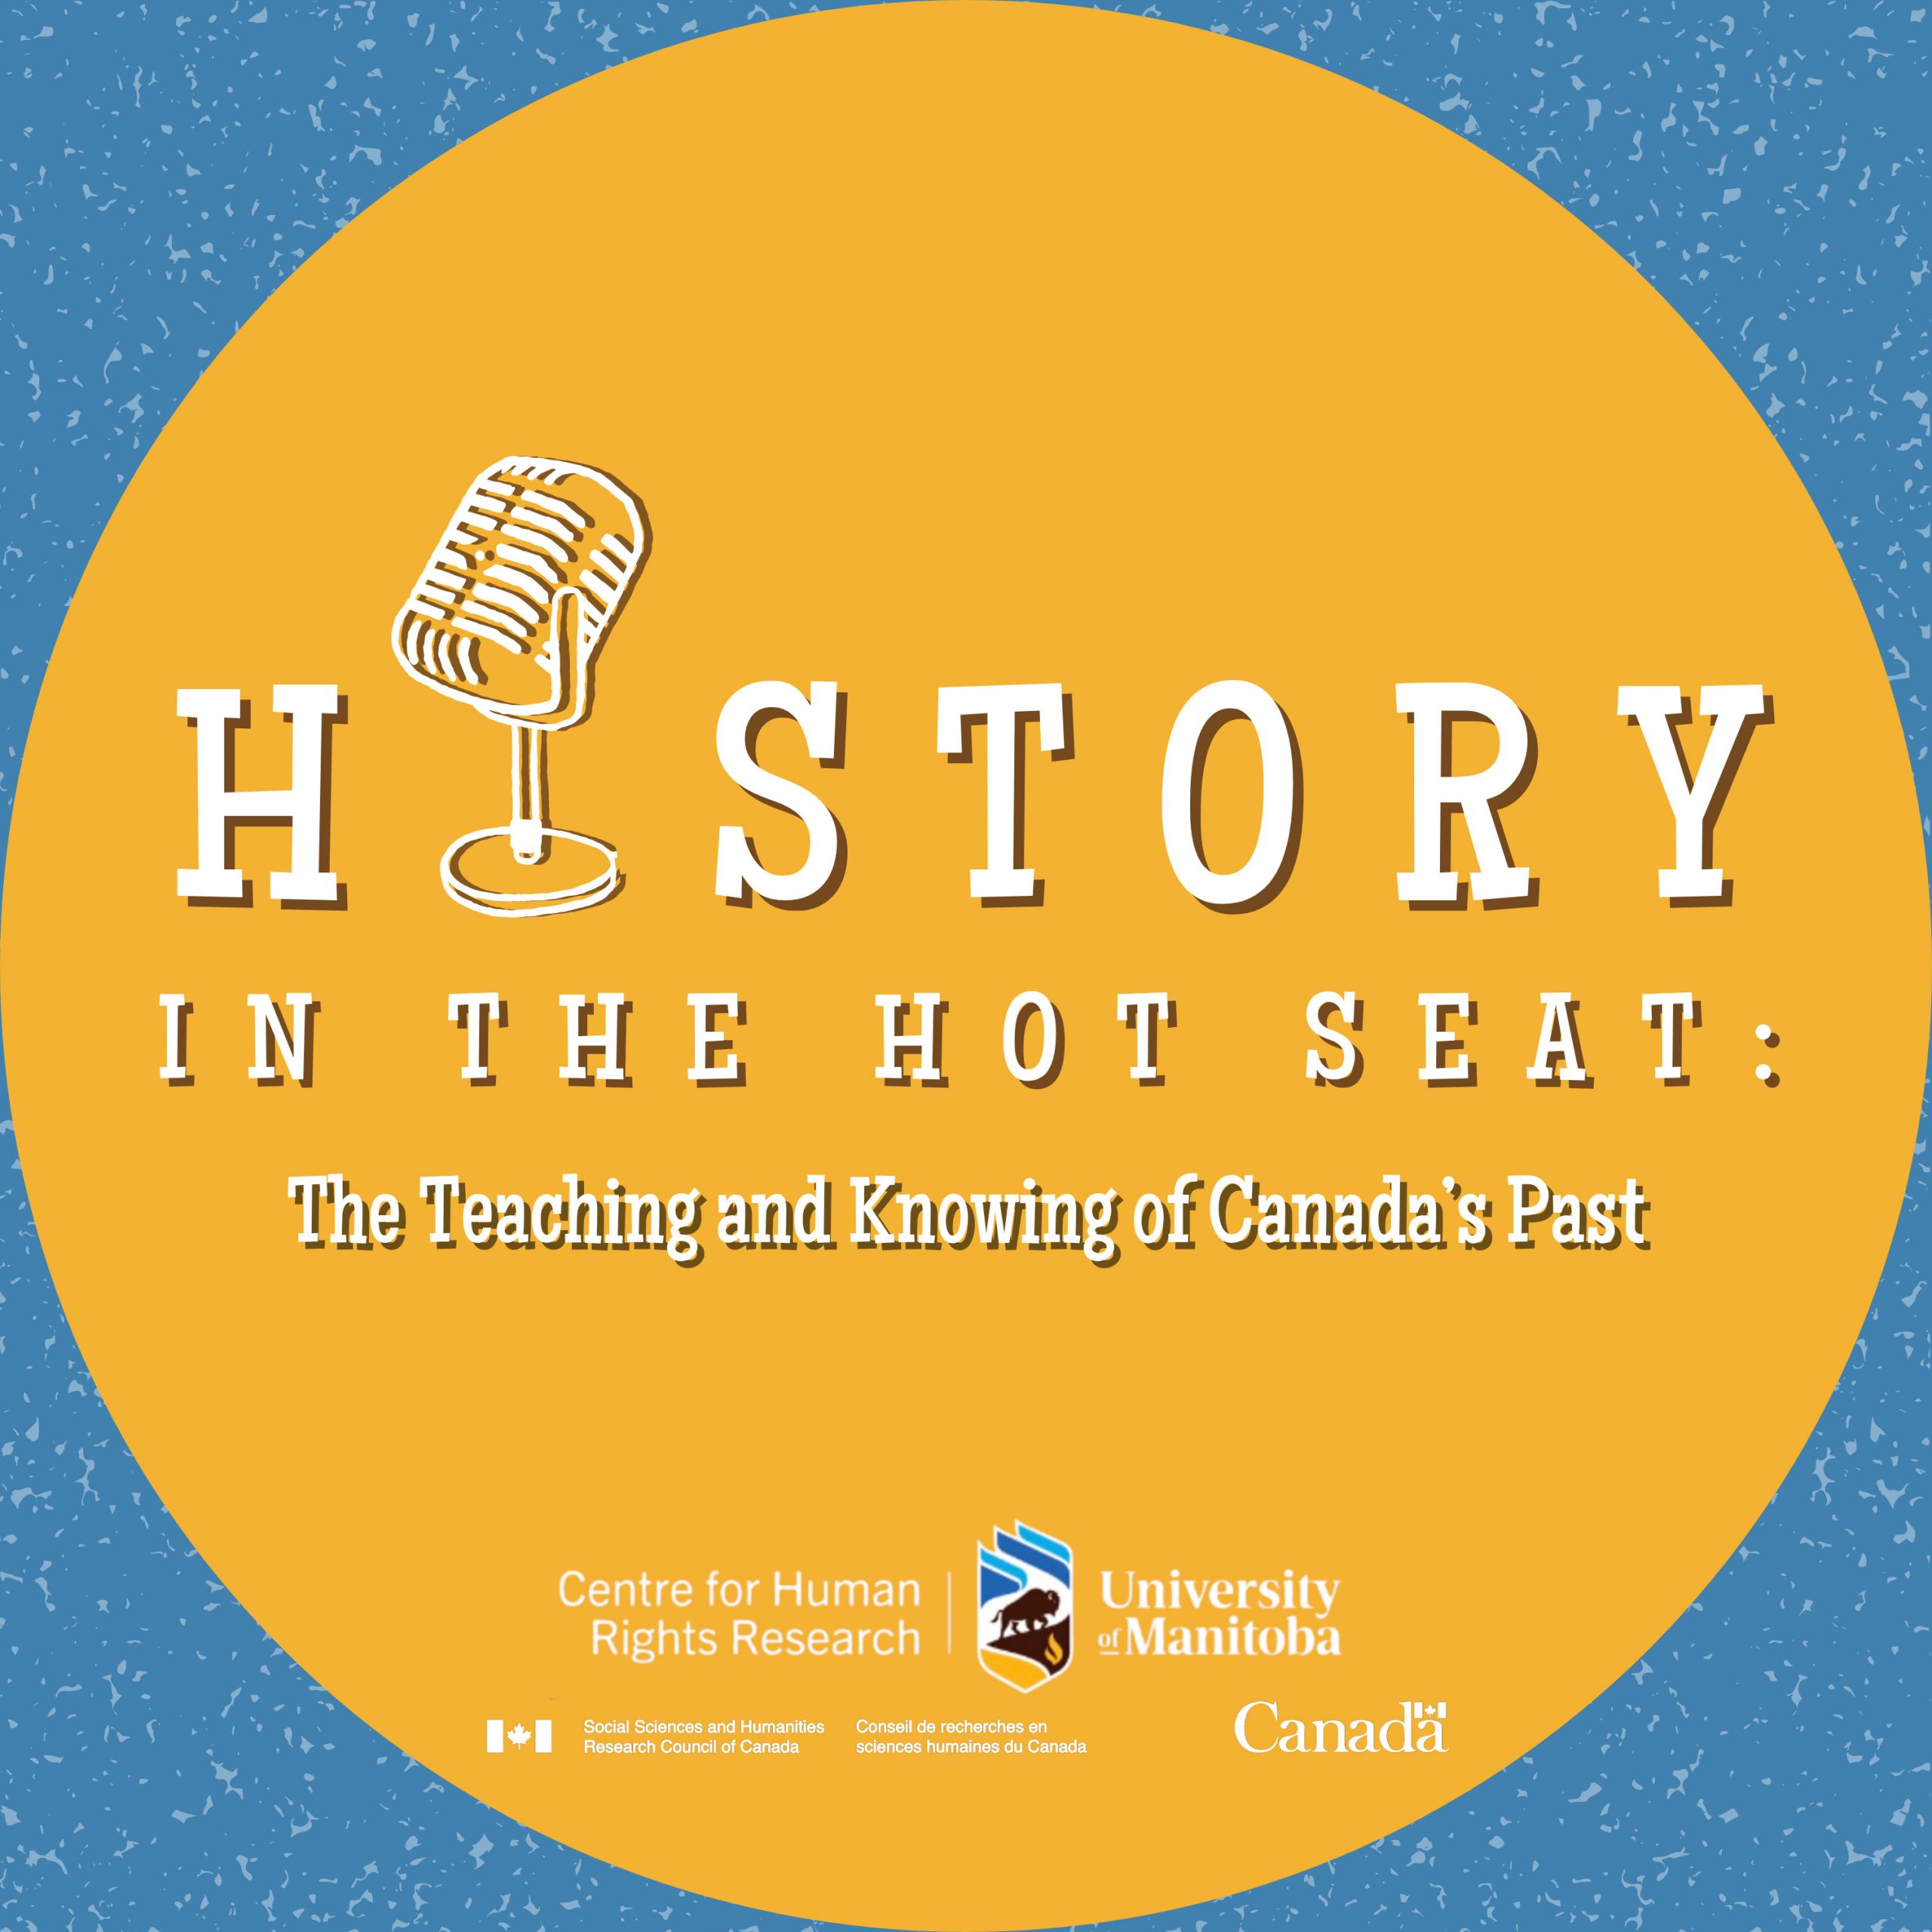 A yellow circle with "History in the Hot Seat" written inside. The 'I' in history is a podcasting microphone.